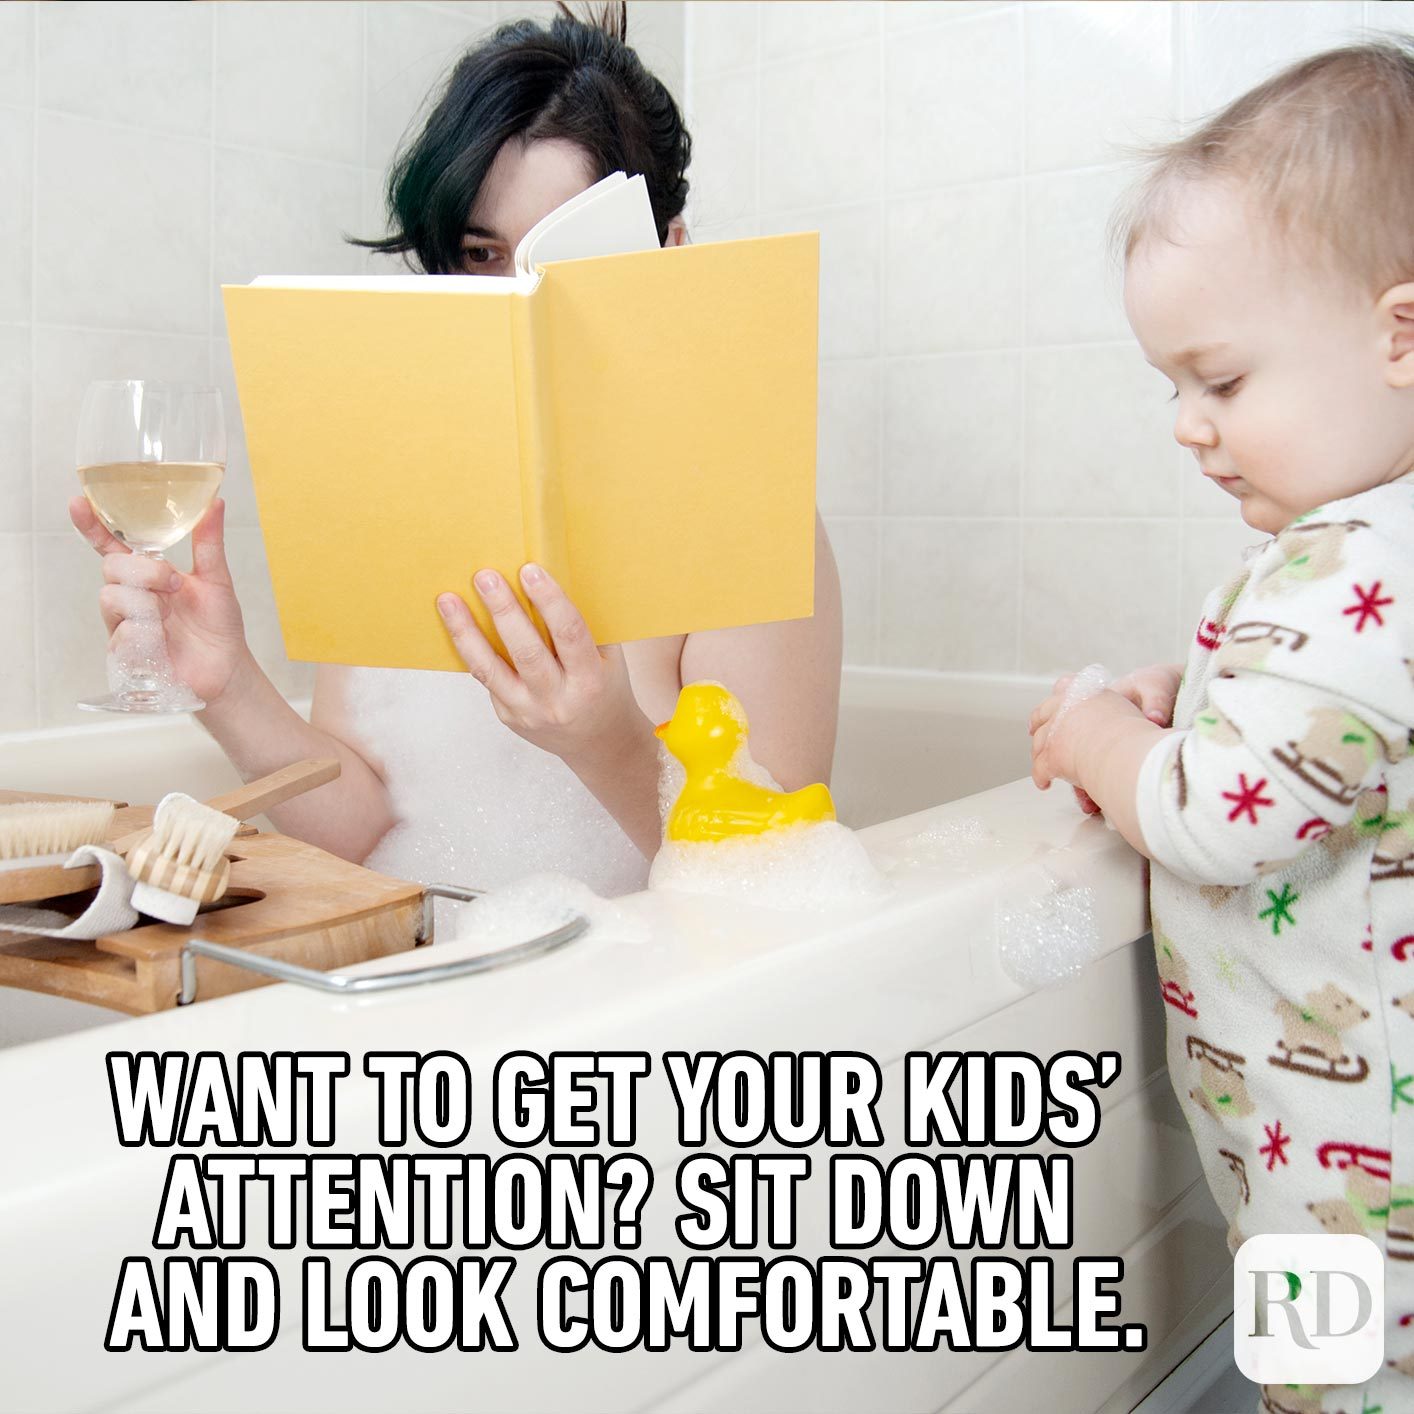 Woman in bathtub being disrupted by child. MEME TEXT: Want to get your kids' attention? Sit down and look comfortable.